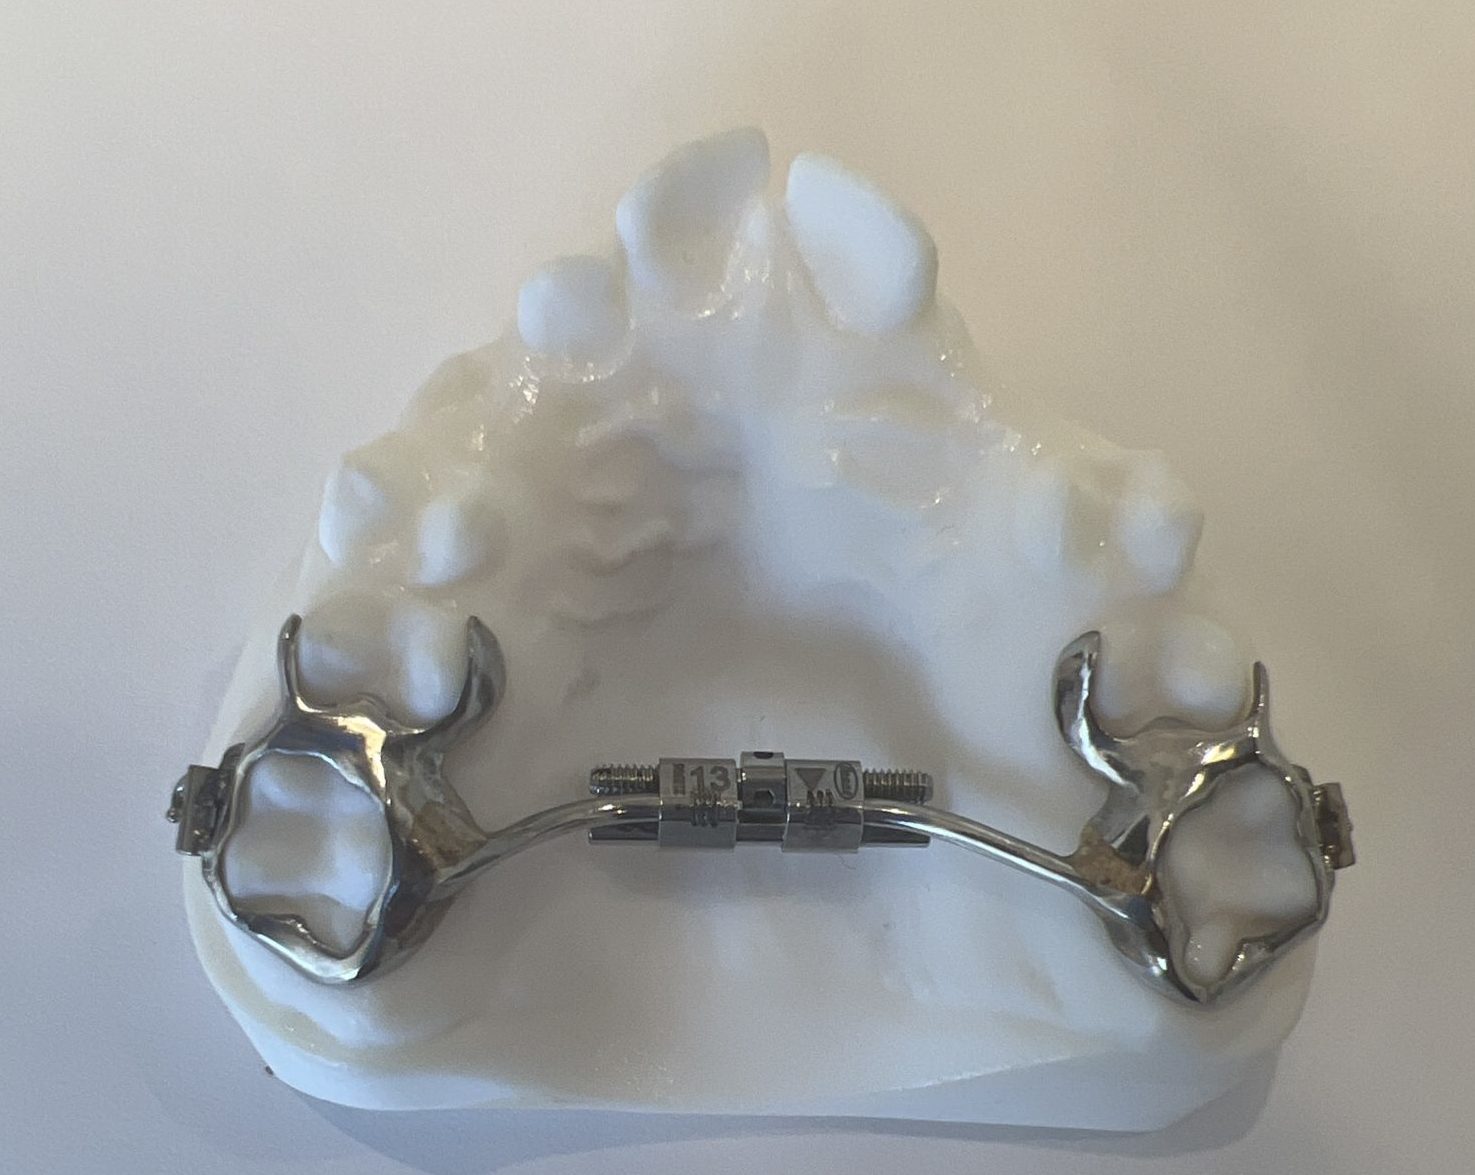 Everything You Need to Know About Palatal Expanders